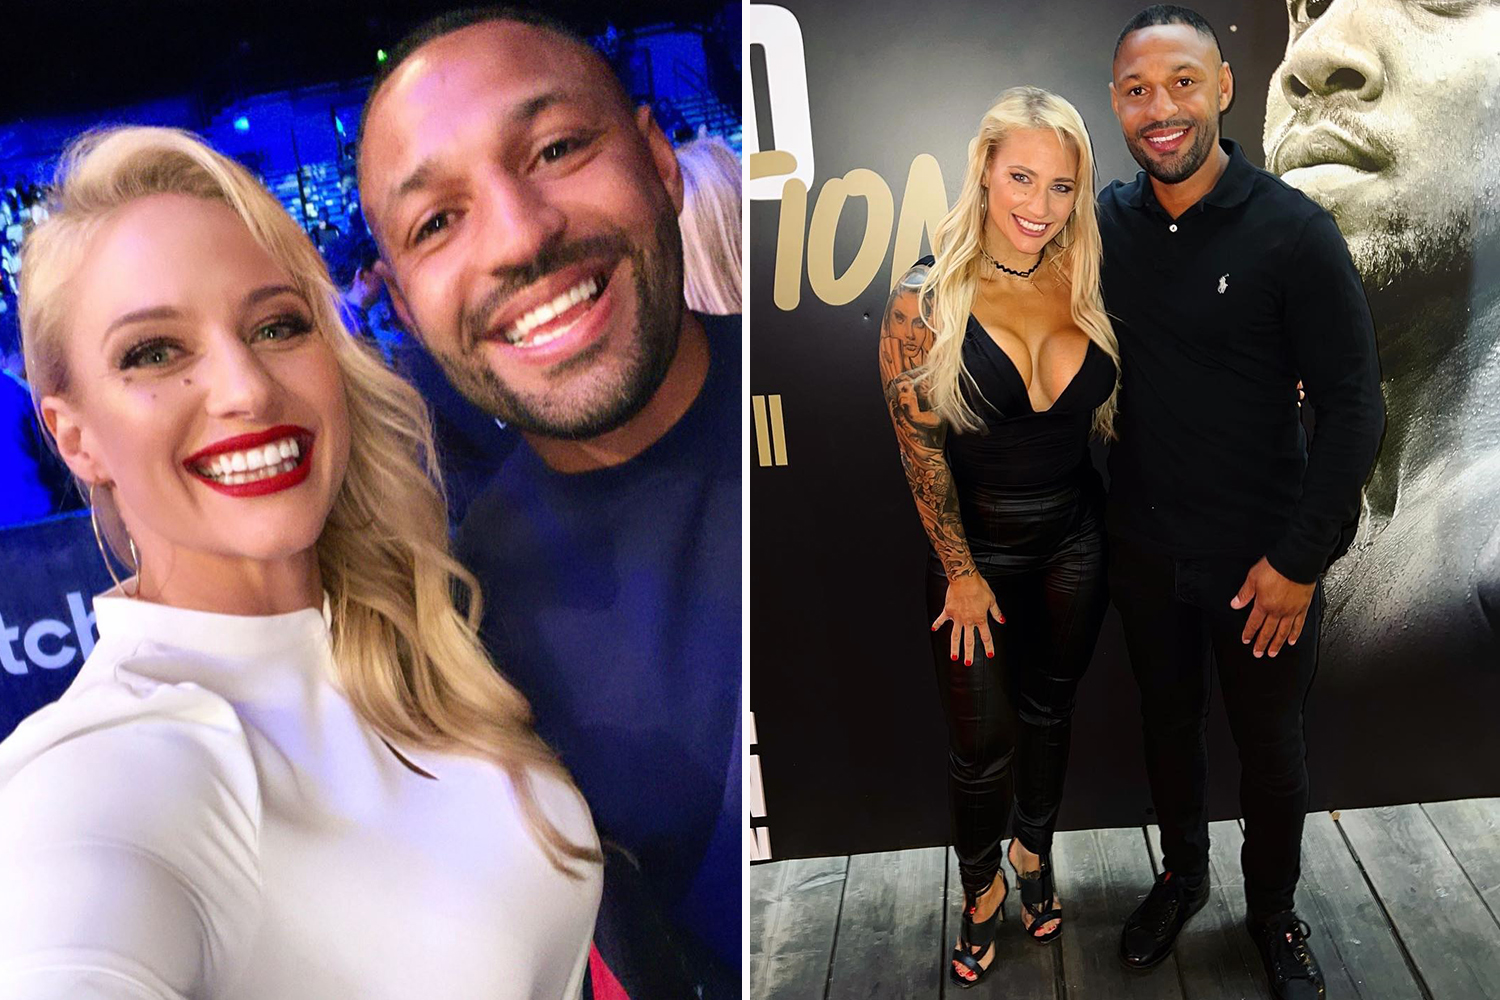 Ebanie Bridges fuels speculation she and Kell Brook are dating as she